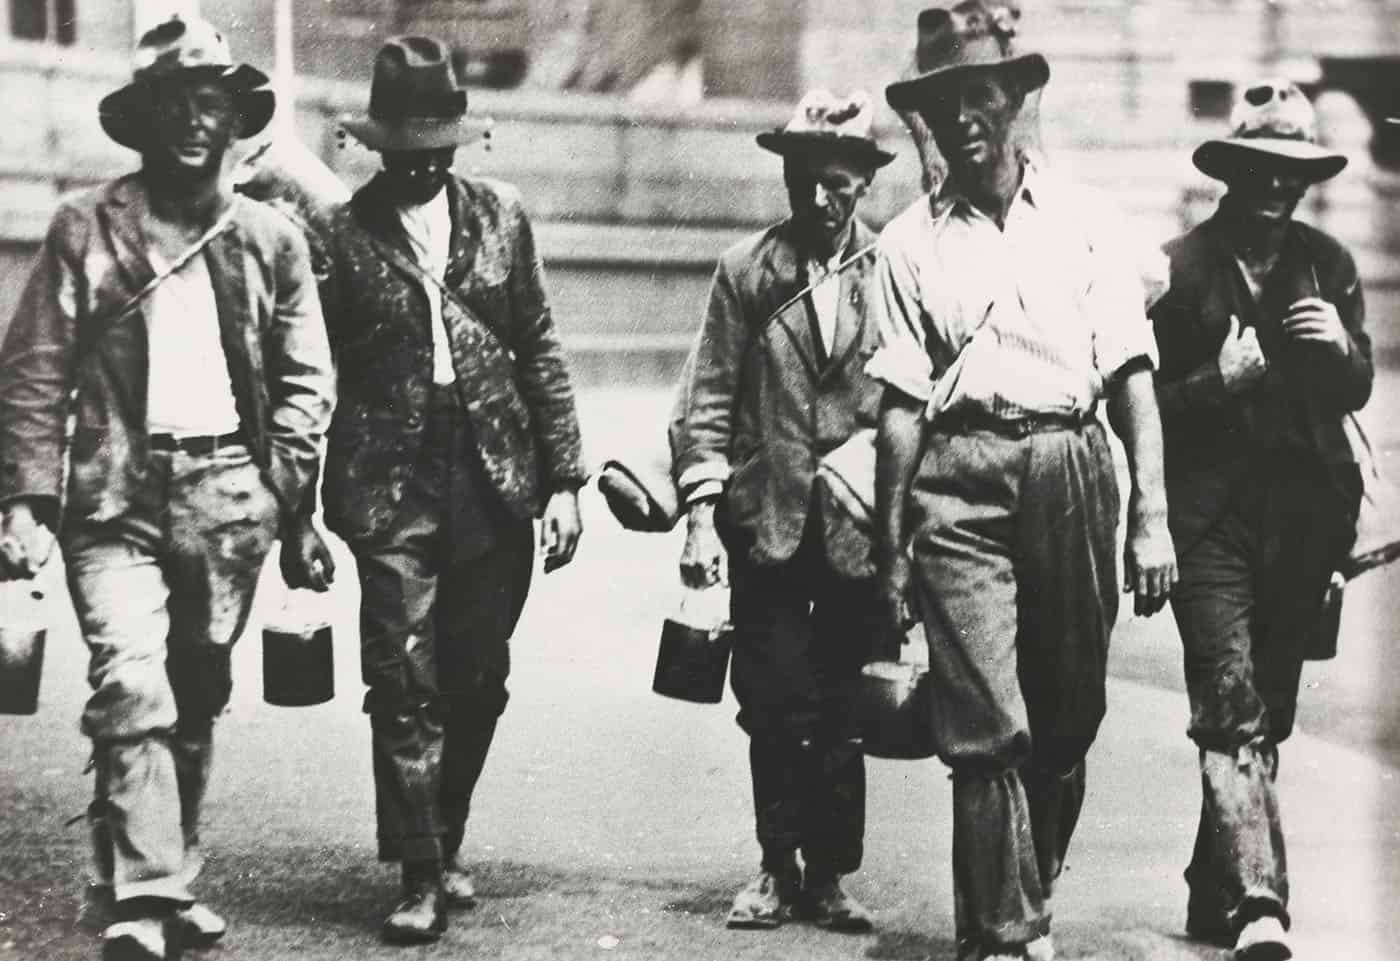  Men looking for work, 1930. National Library of Australia